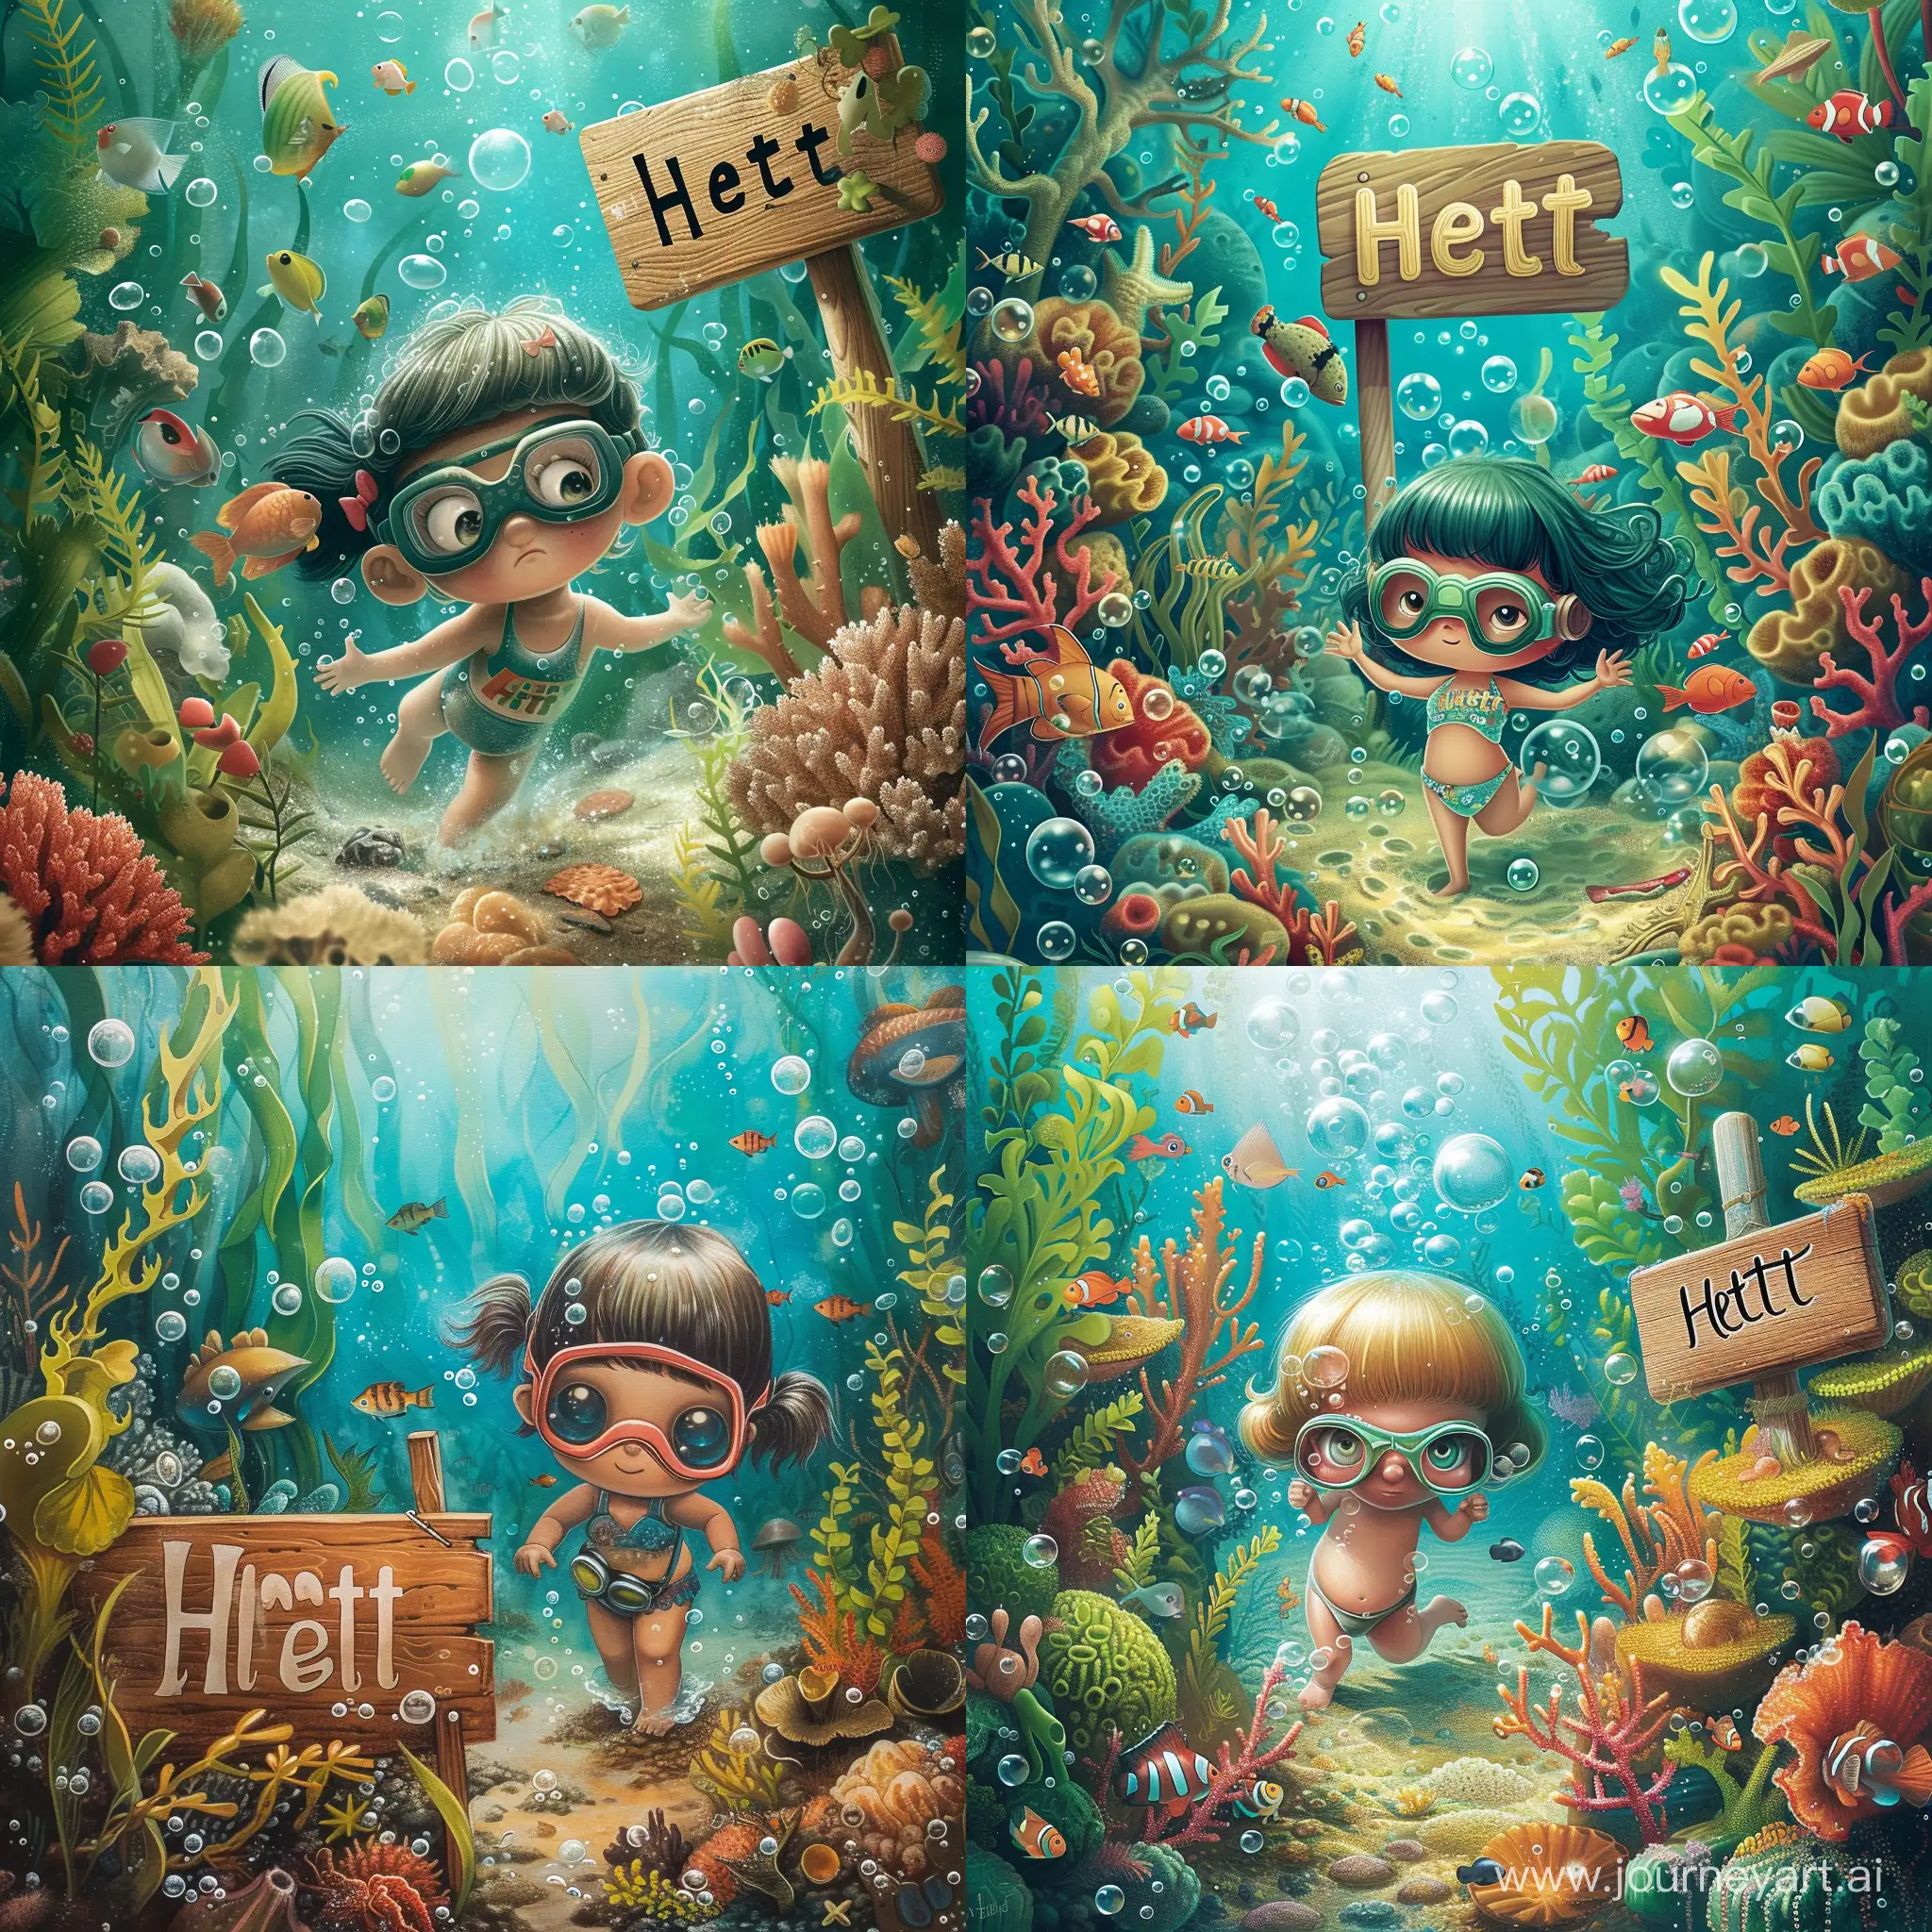 an underwater scene,  a little girl in a bathing suit and goggles, surrounded by coral reefs, seaweed, fish, bubbles,  a wooden sign in the coral reef that reads "Hetti."